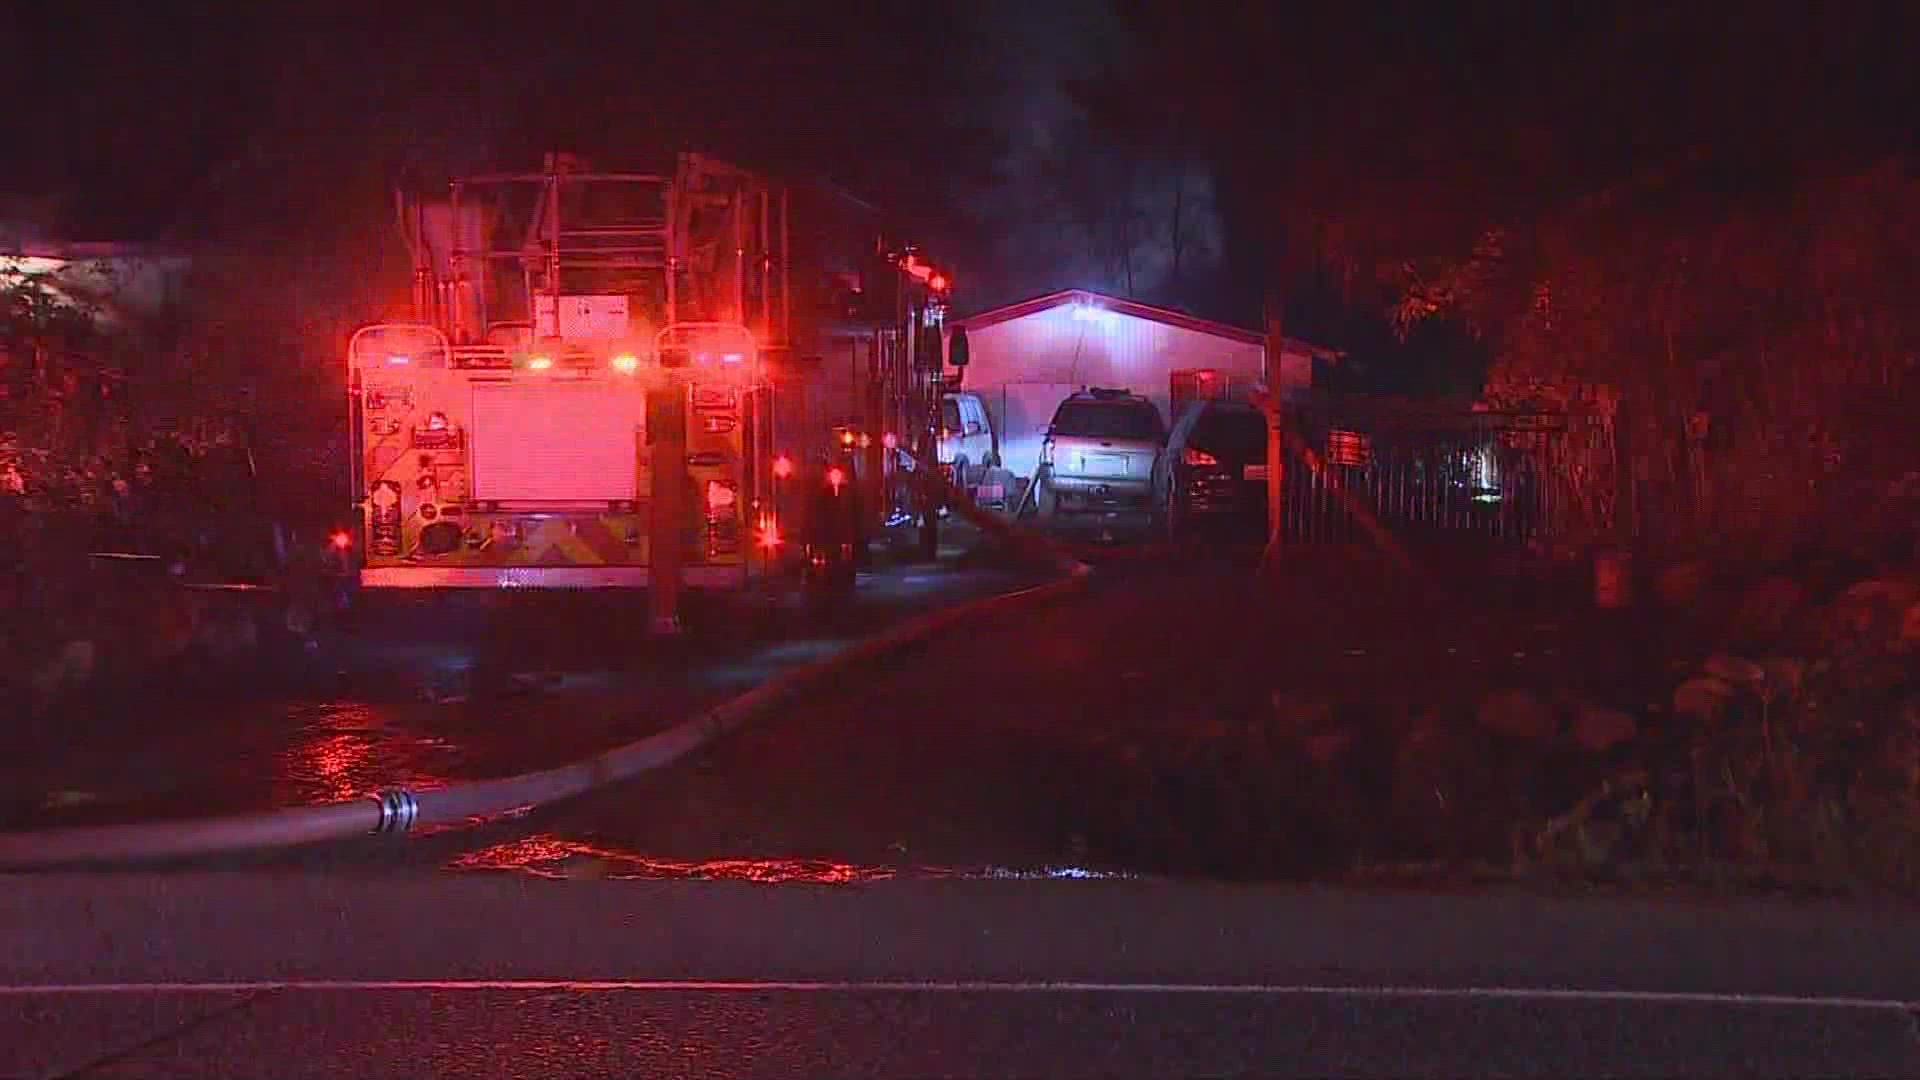 King County investigators said they found a body after a fire at a trailer in Auburn early Thursday morning